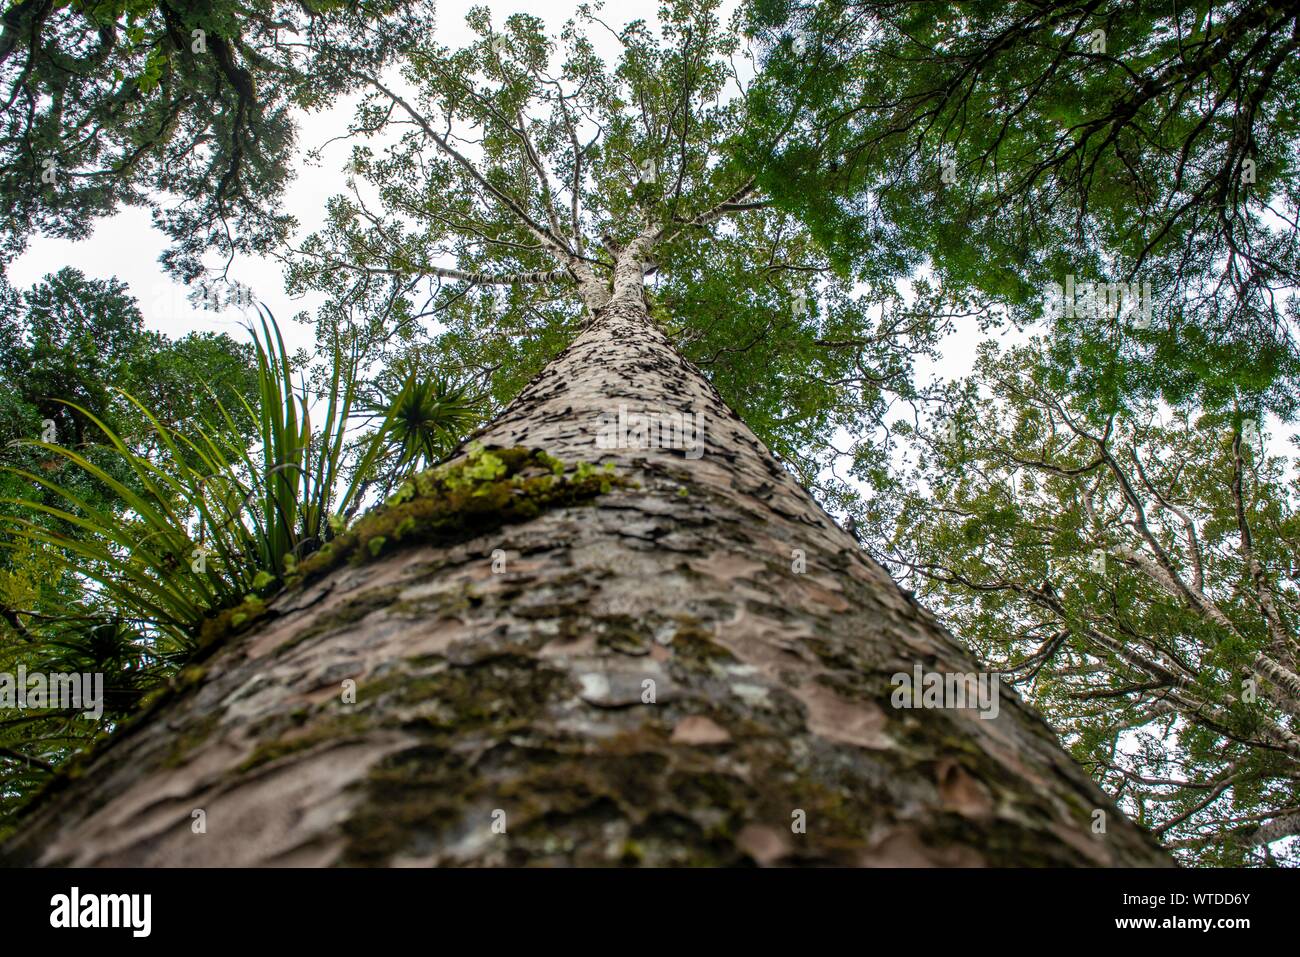 Giant Agathis australis (Agathis australis), worm's-eye view, Waipoua Forest, Northland, North Island, New Zealand Stock Photo